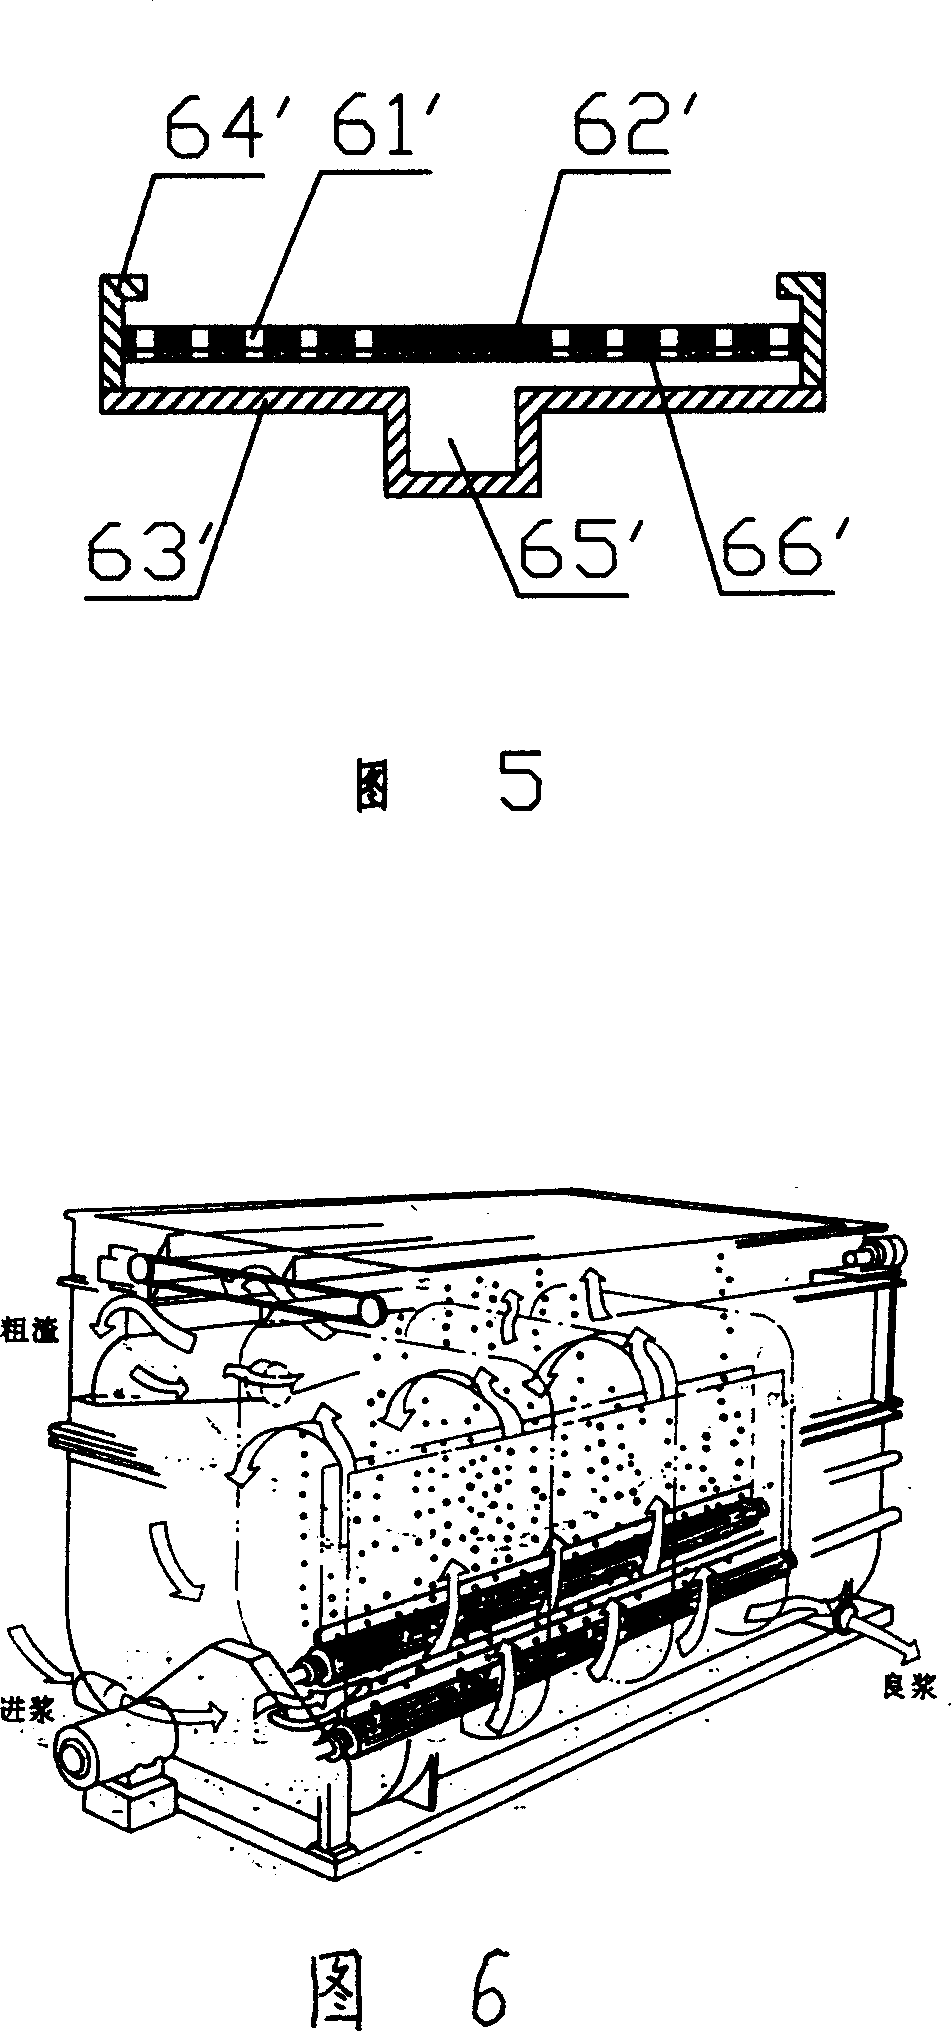 Floatation and ink removing machine